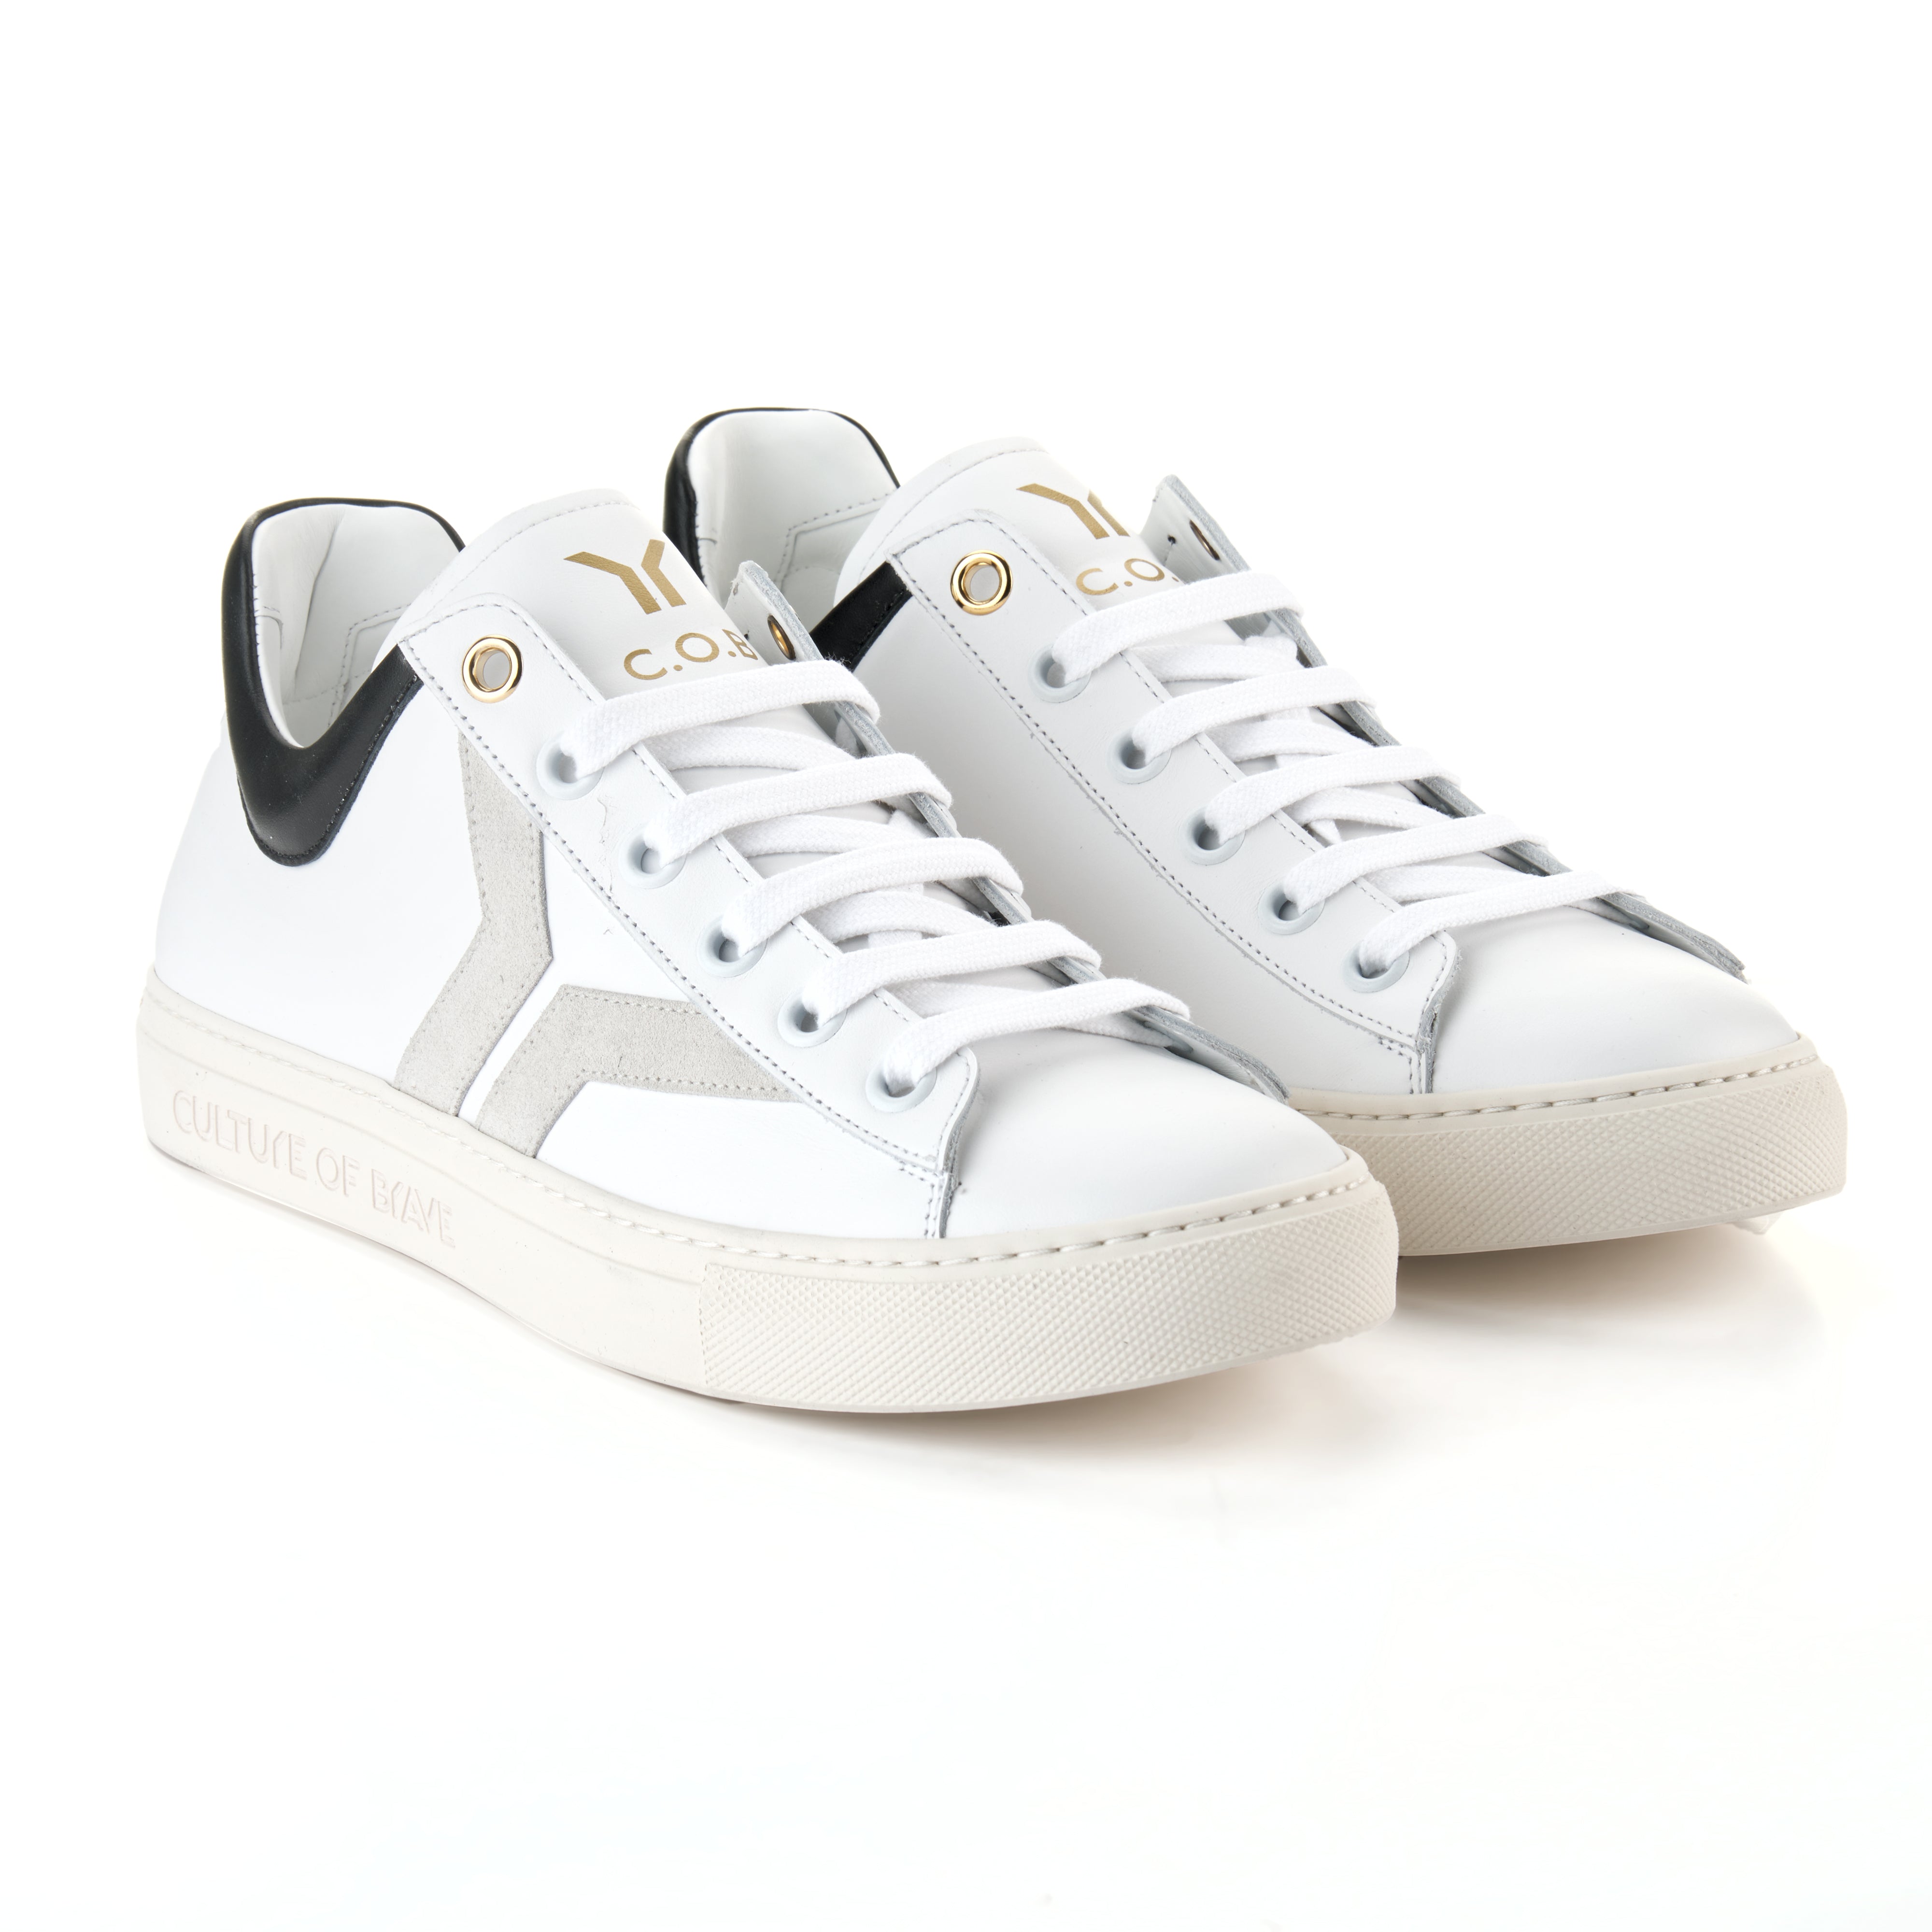 Courage S32 Men White leather black ankle offwhite wing low cut